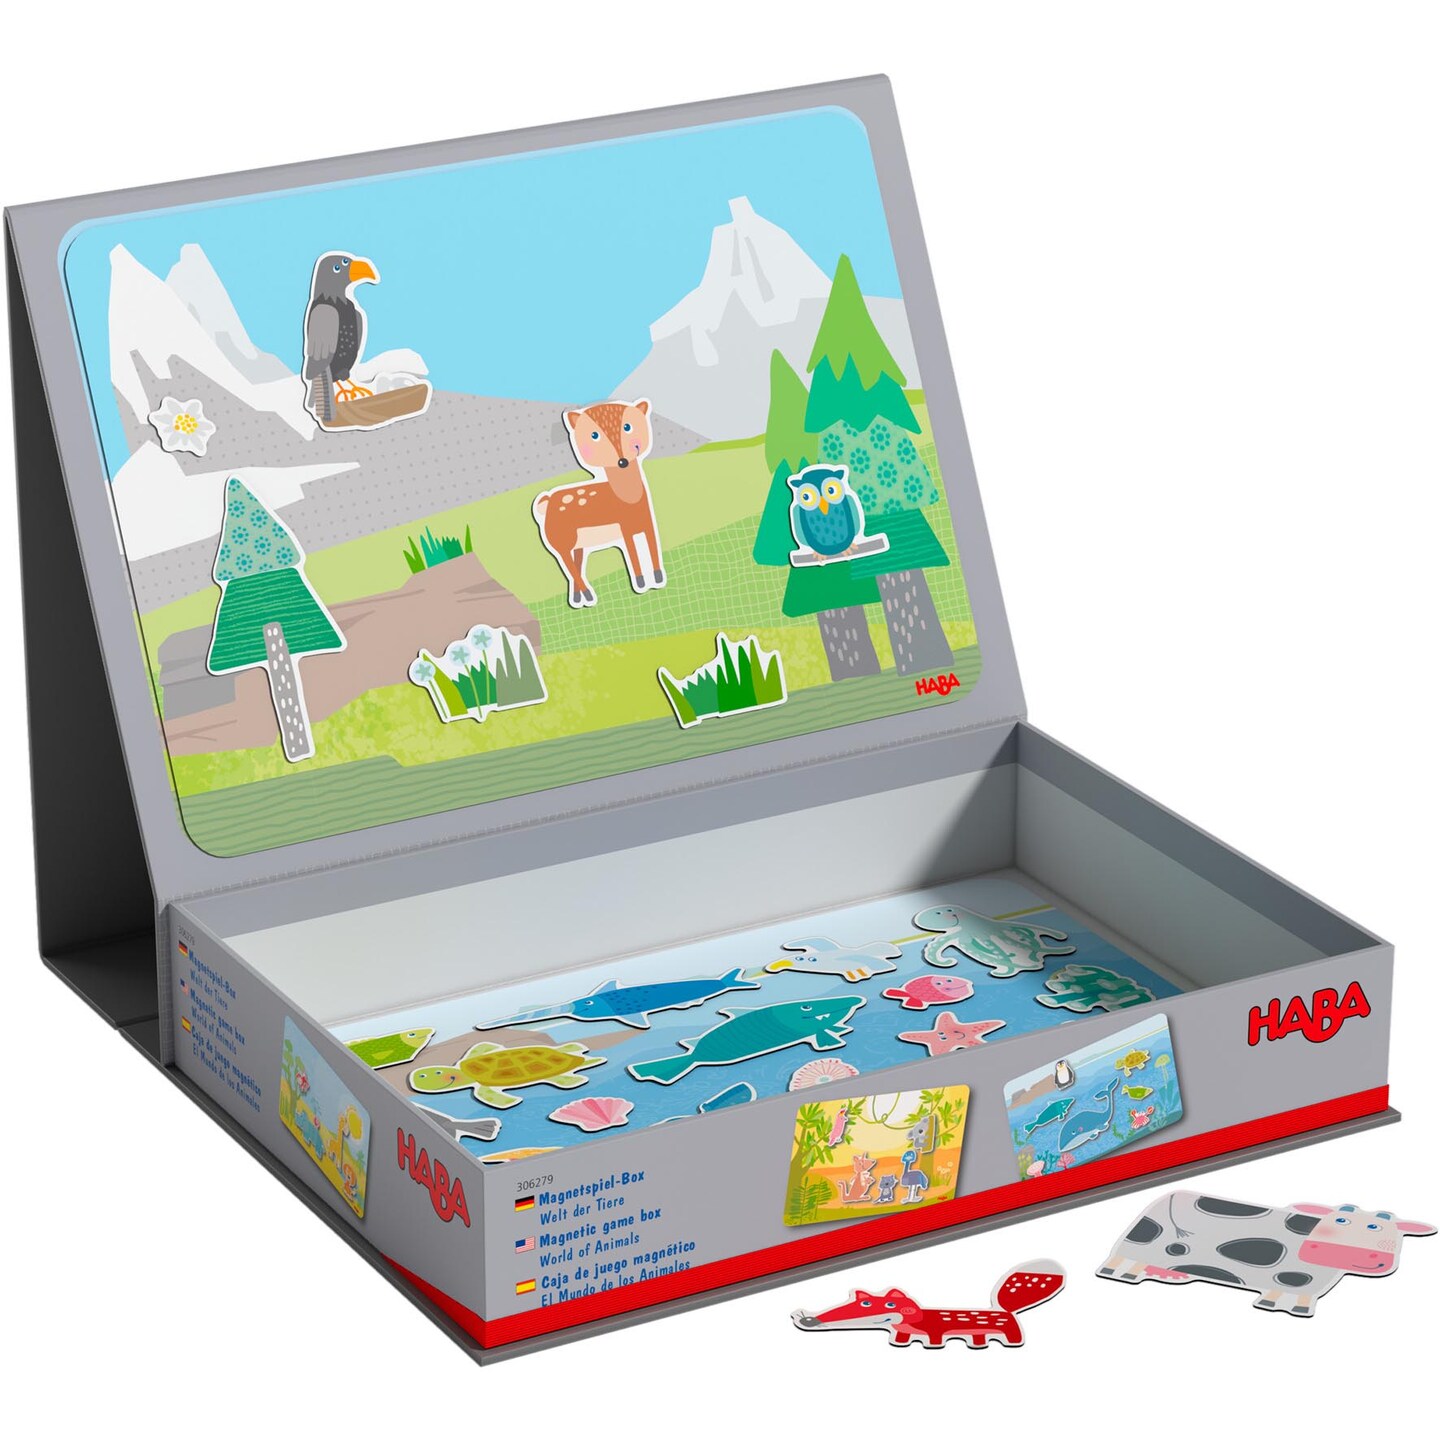 HABA Magnetic Game Box World of Animals in Their Habitats - 62 Magnetic Pieces in Cardboard Carrying Case with 4 Background Scenes